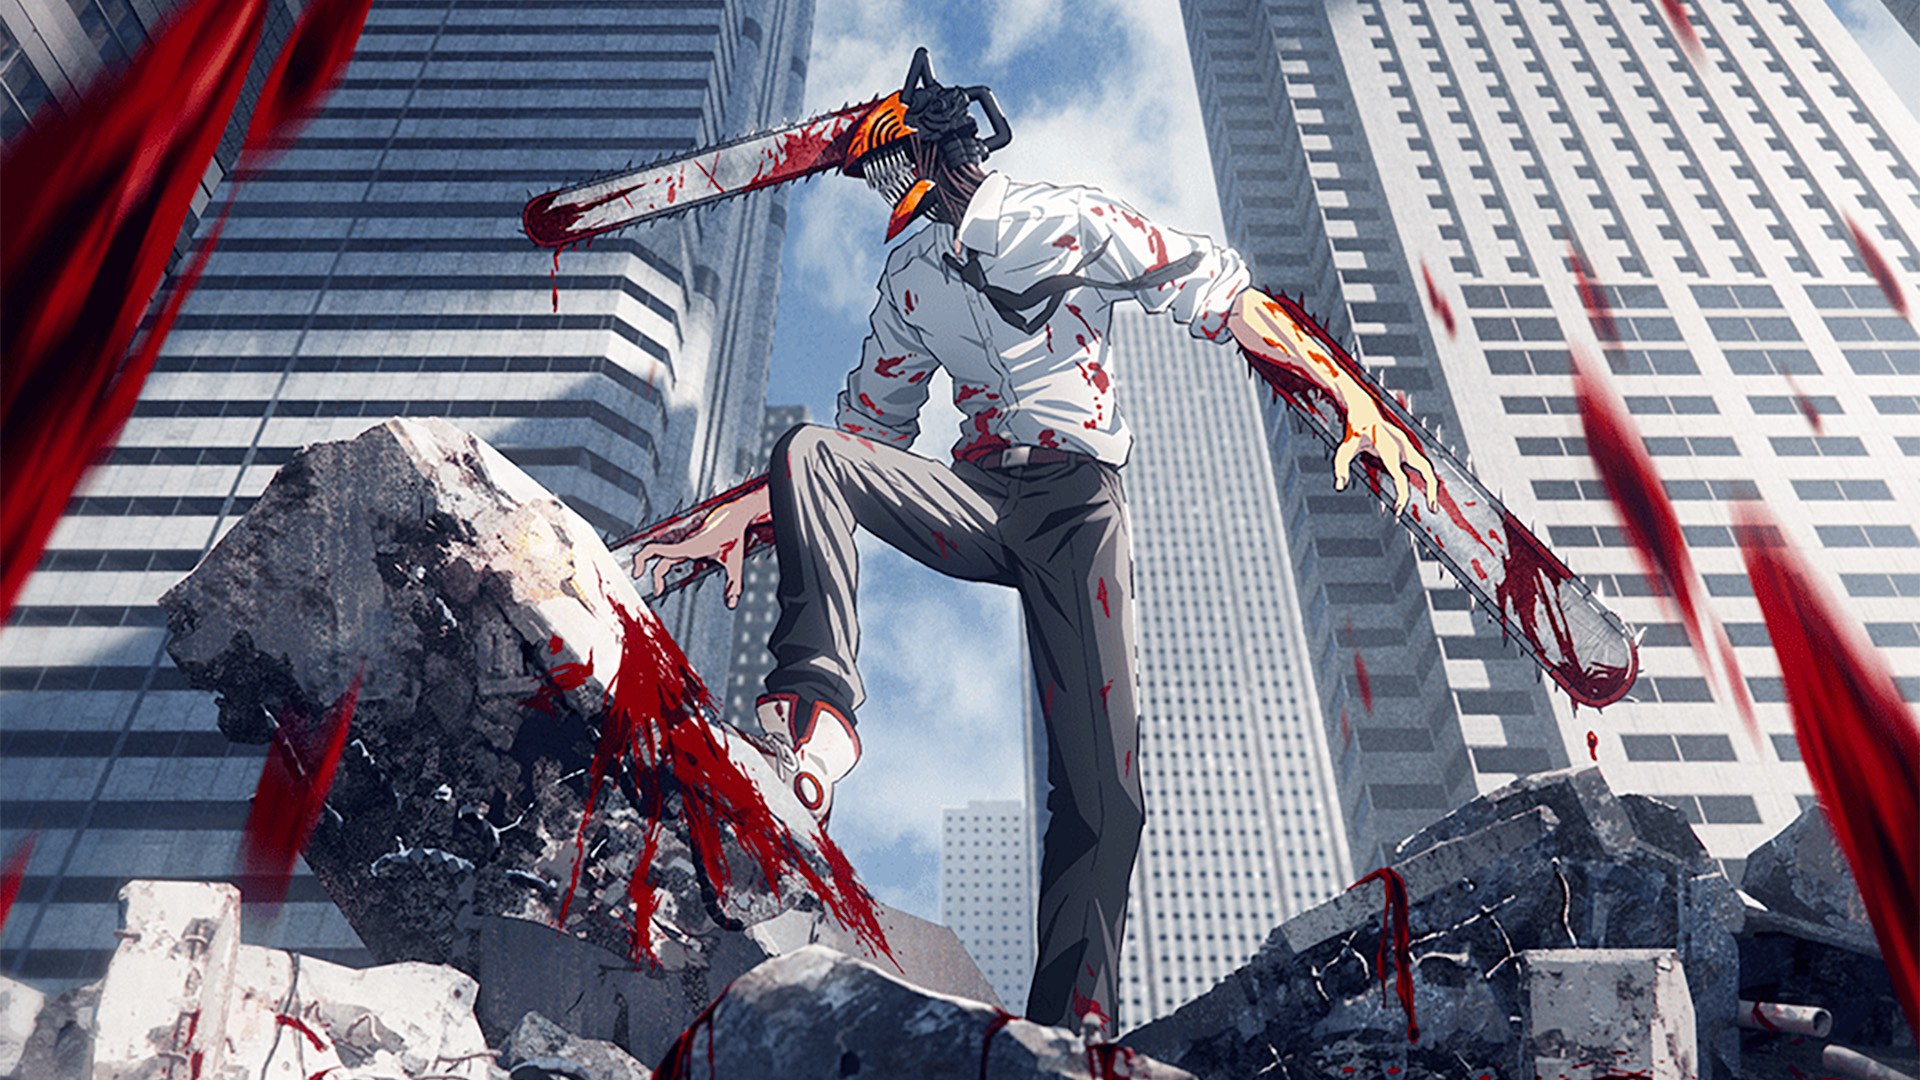 Key art visual of Denji in his full Chainsaw Man form standing over a pile of rubble flanked by towering skyscrapers in Chainsaw Man.